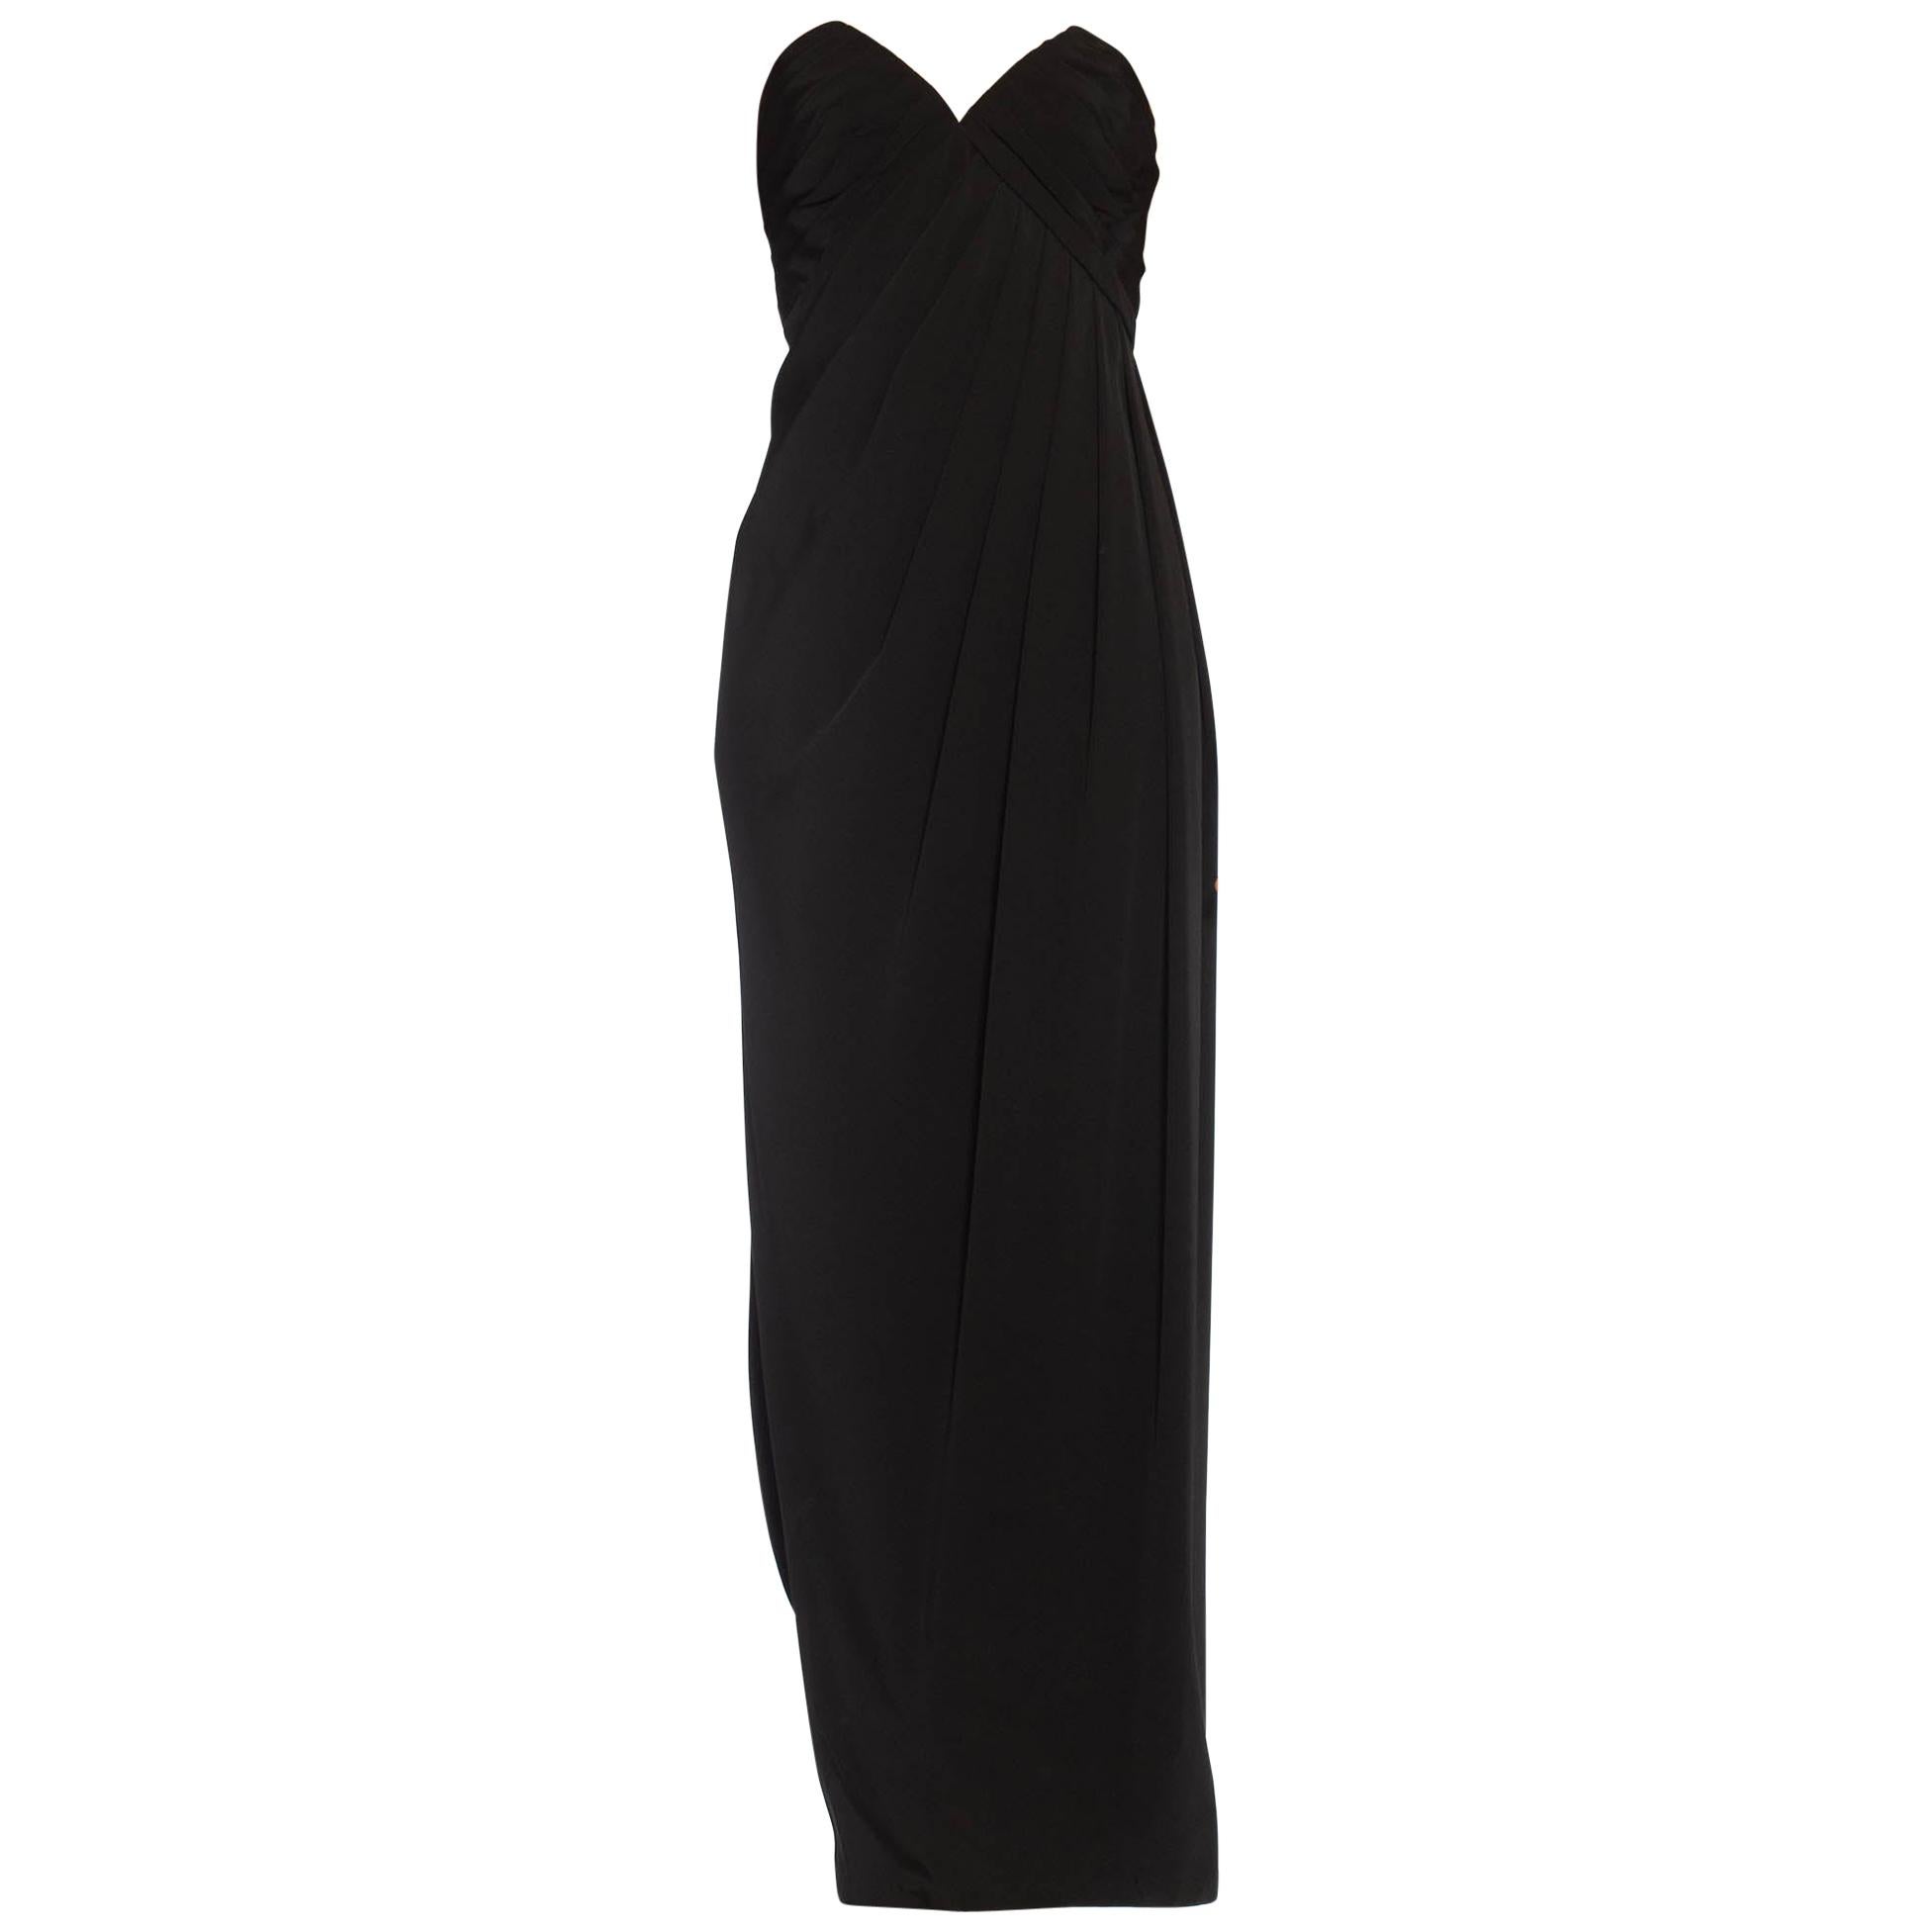 1980S GIVENCHY Black Haute Couture Silk Crepe Strapless Gown For Sale